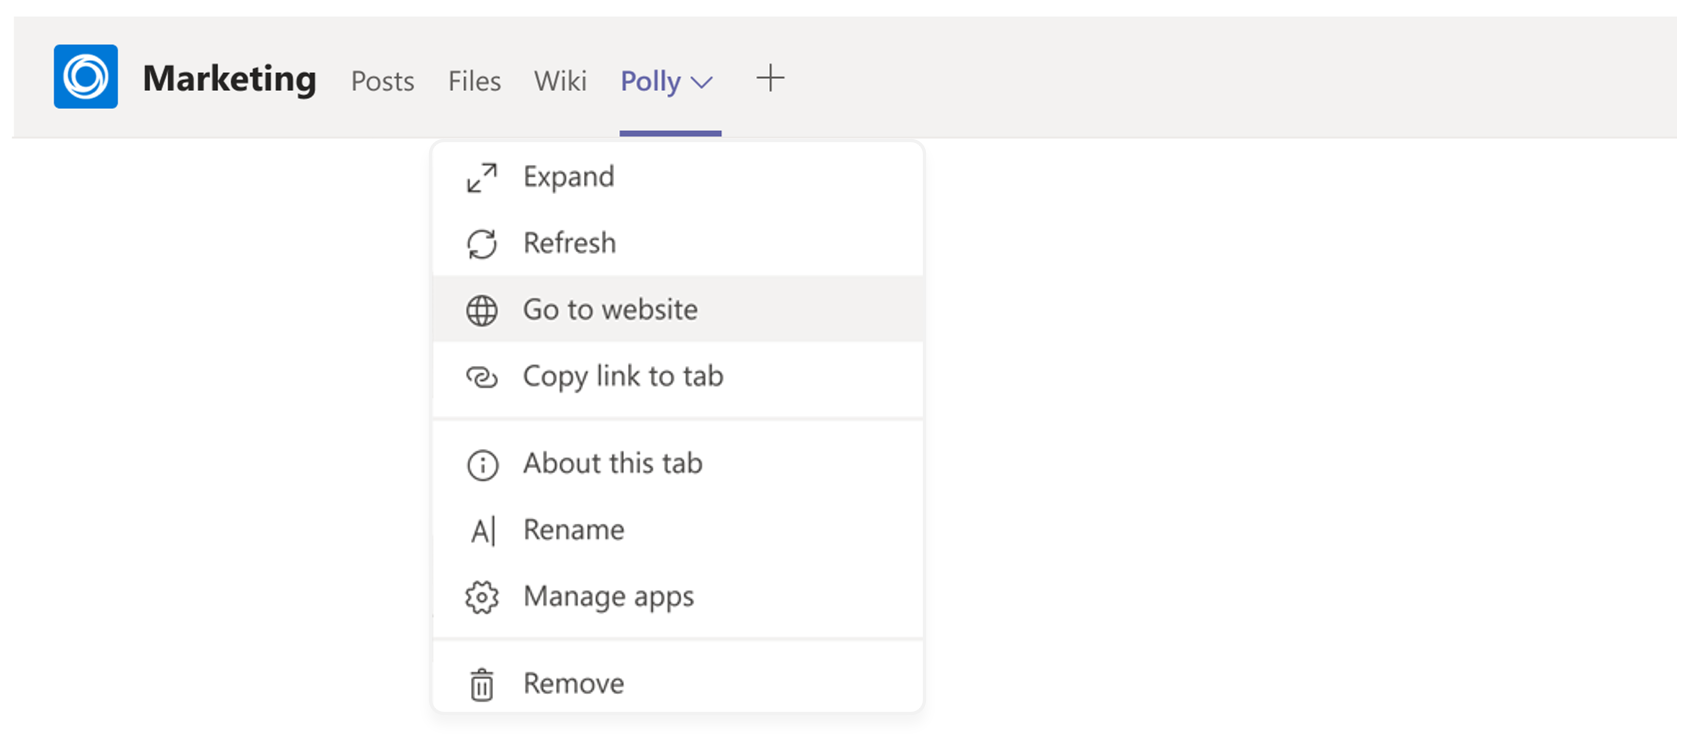 Microsoft Teams Tab Actions are Moving